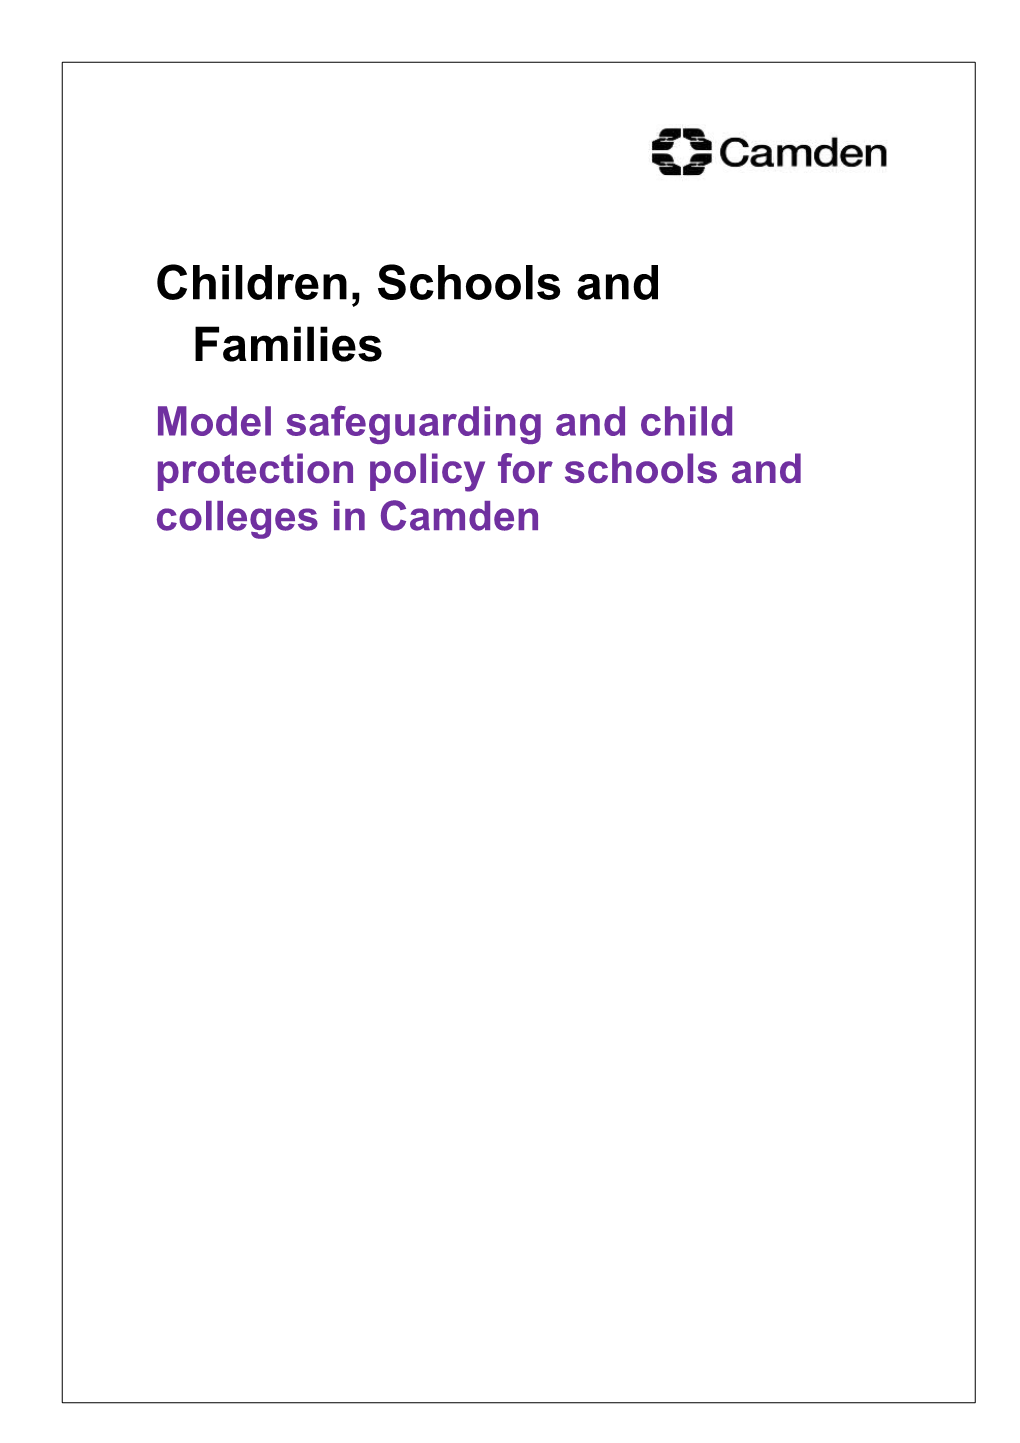 Notes on Guidance for Schools Re: Cp and Safeguarding Policy